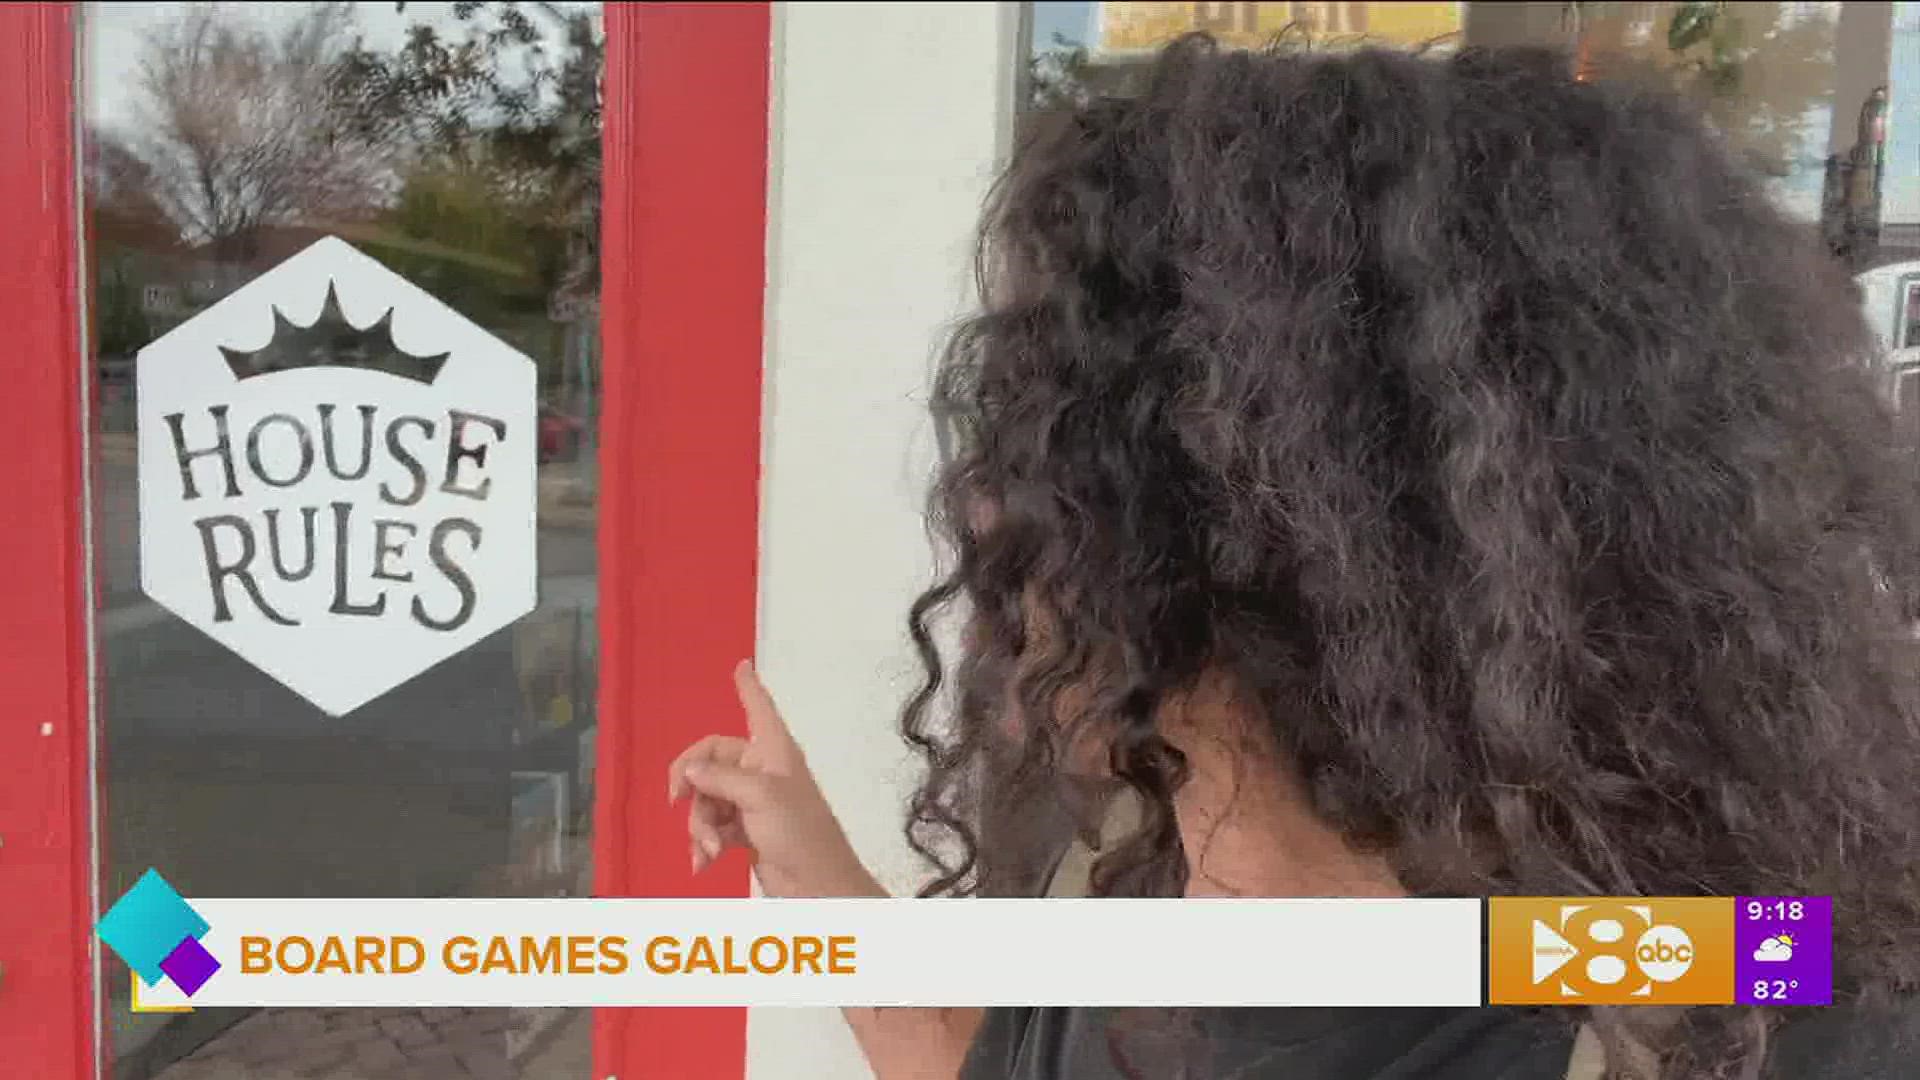 Hannah shows us a whole shop dedicated to connecting through board games.